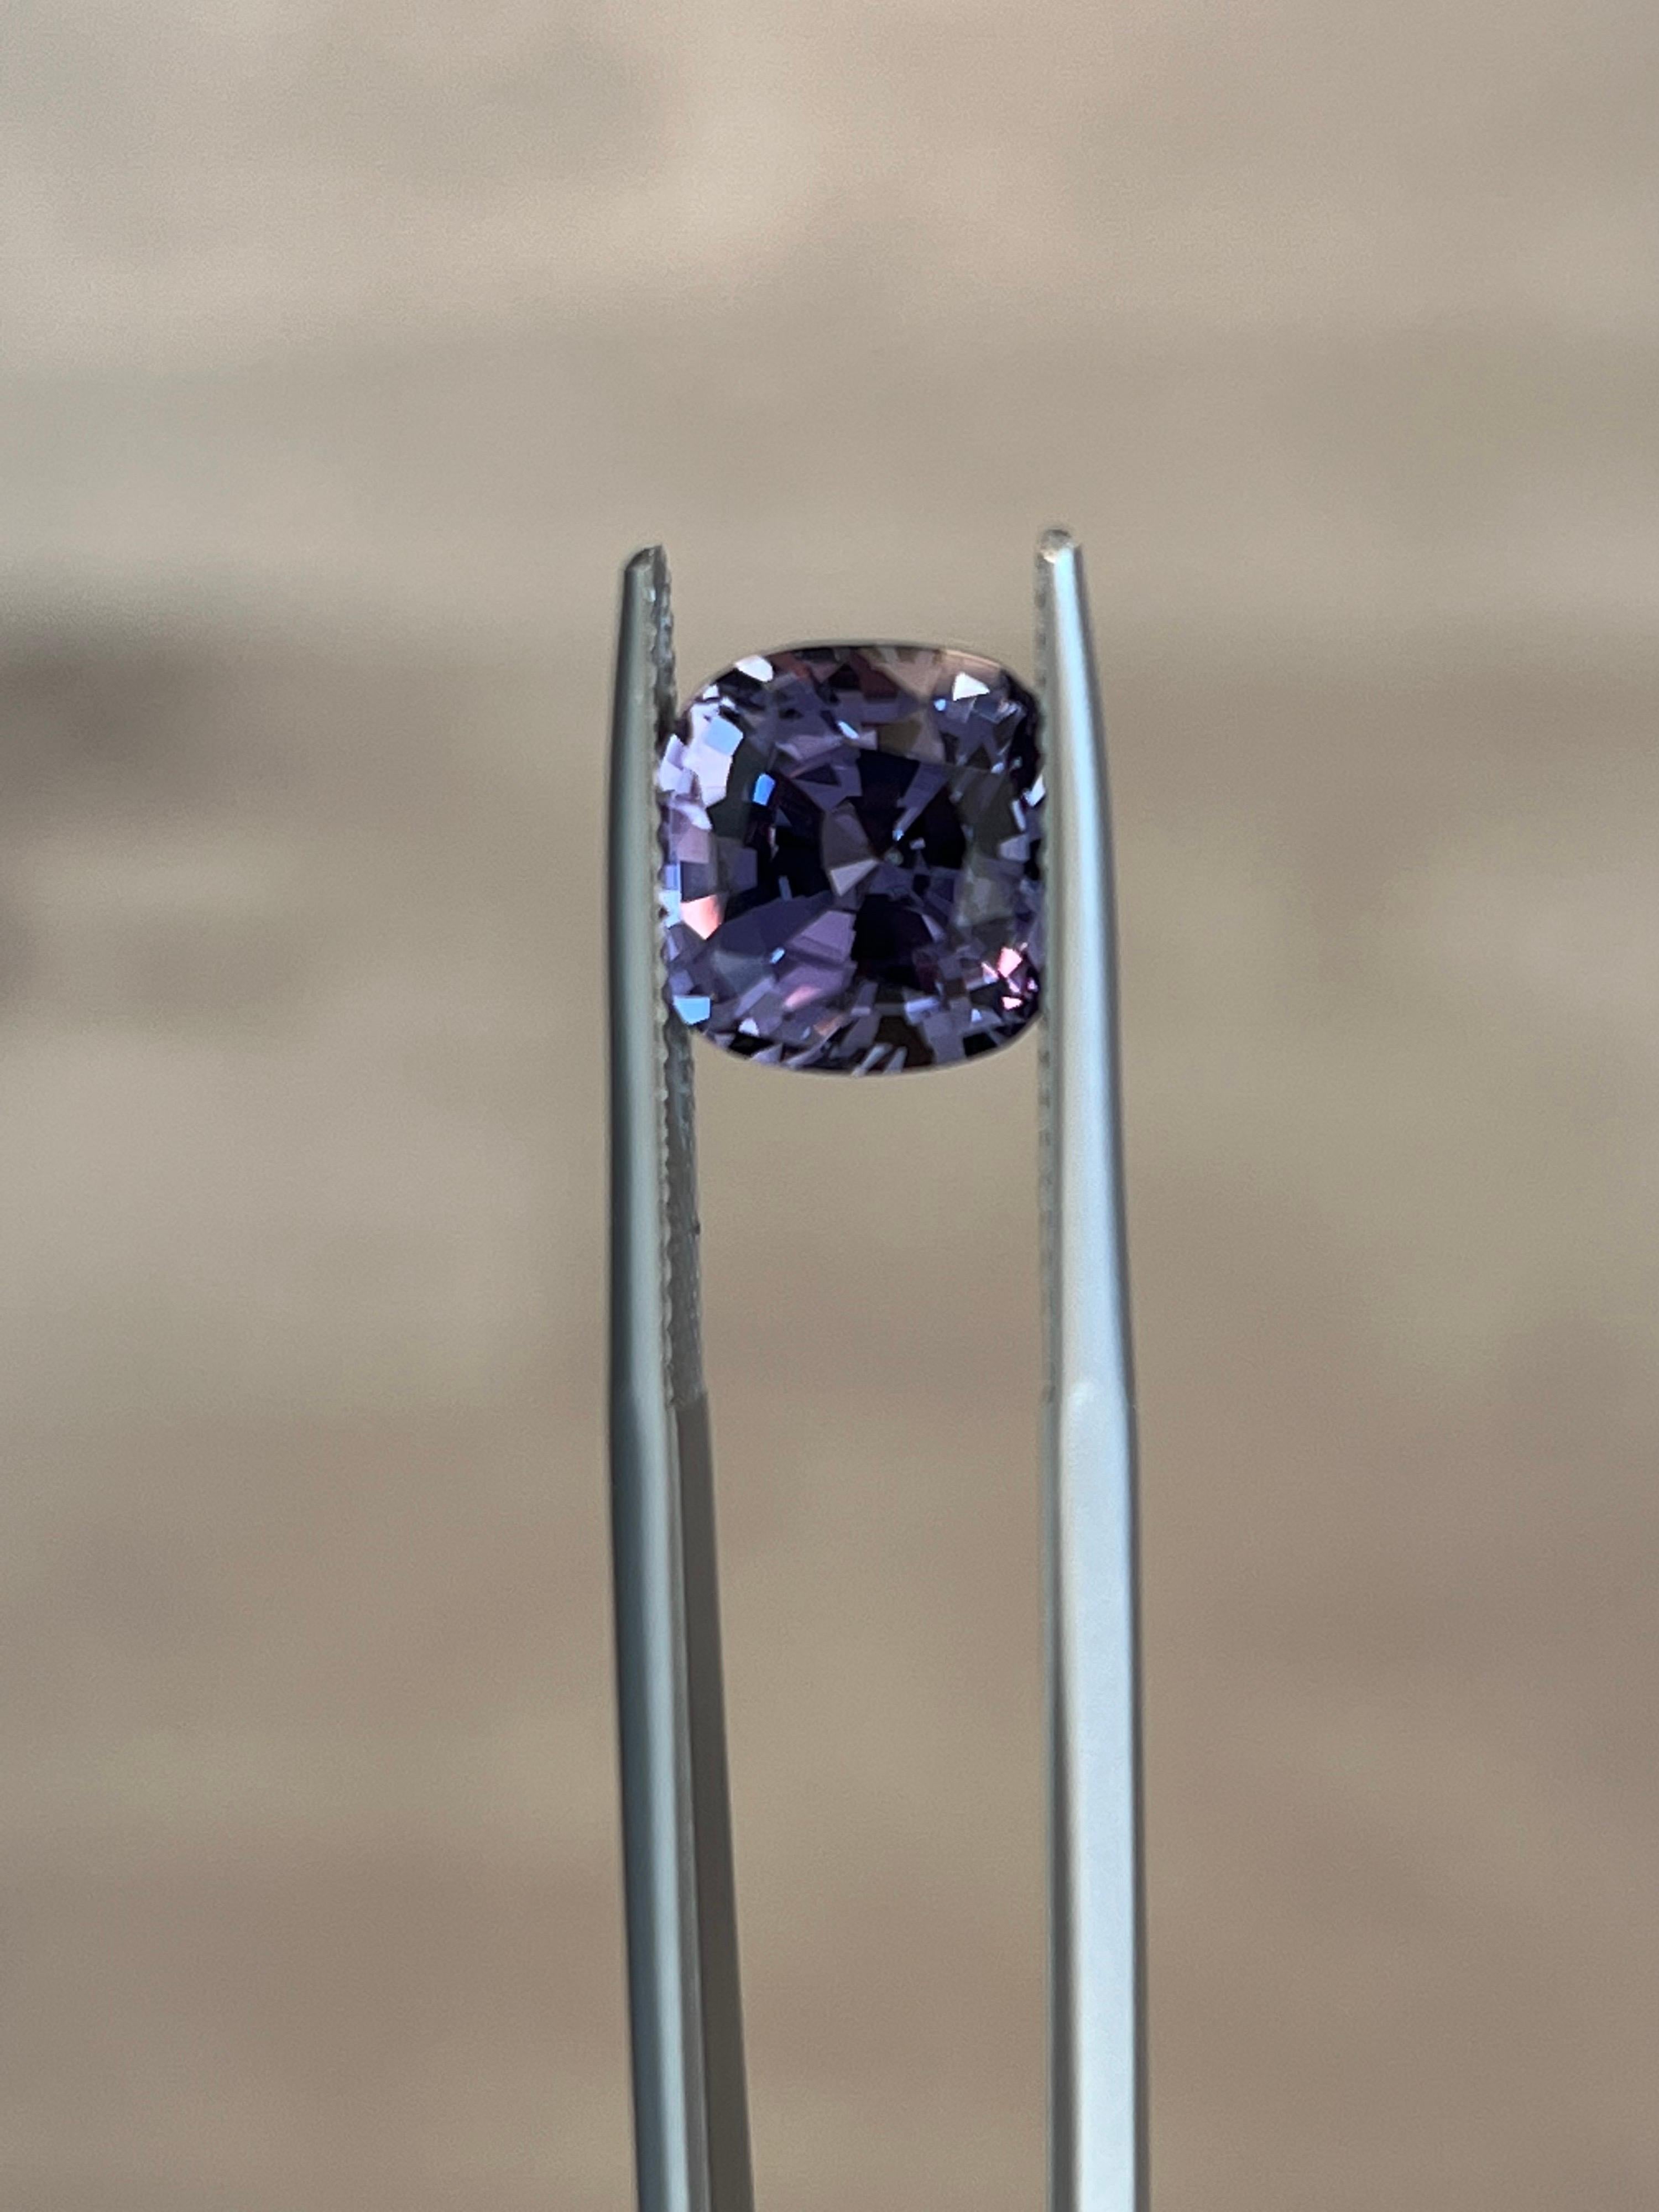 Contemporary Purple Spinel Ring Gem 4.63 Carat Cushion Loose Gemstone Loupe Clean For Sale